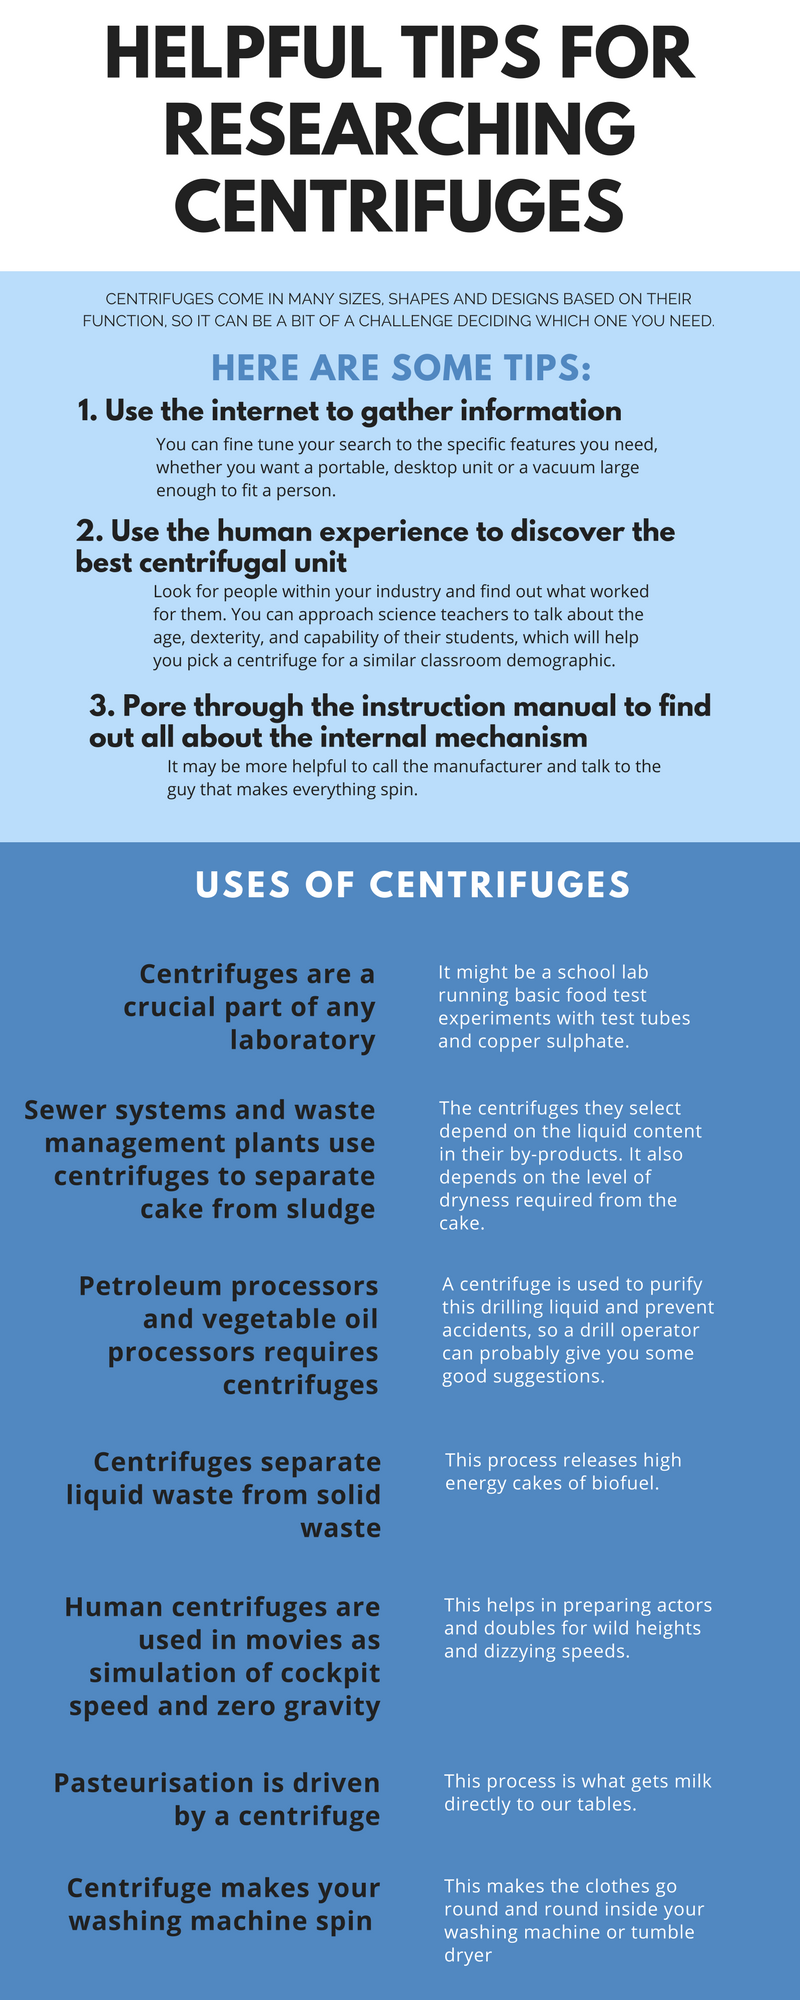 Helpful tips for researching centrifuges